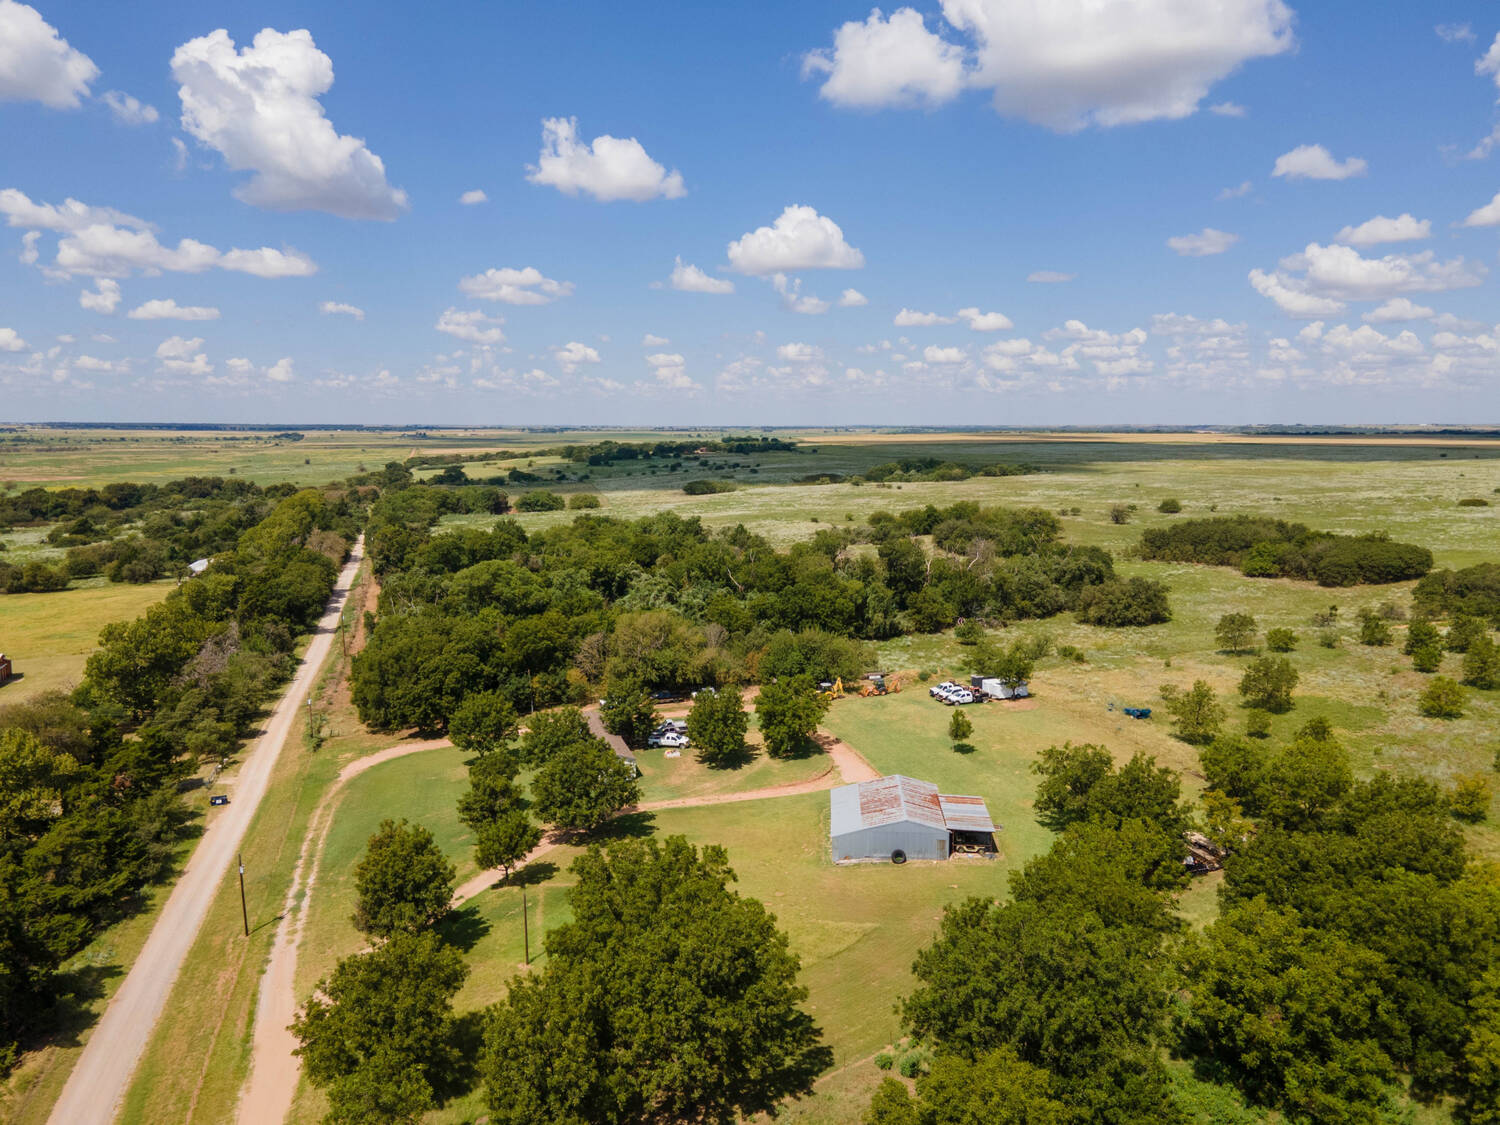 The-Pecan-Tract-Clay-County-Pecan-Orchard-Hunting-Ranch-TX-Republic-Ranches-Bryan-Pickens-6-of-15